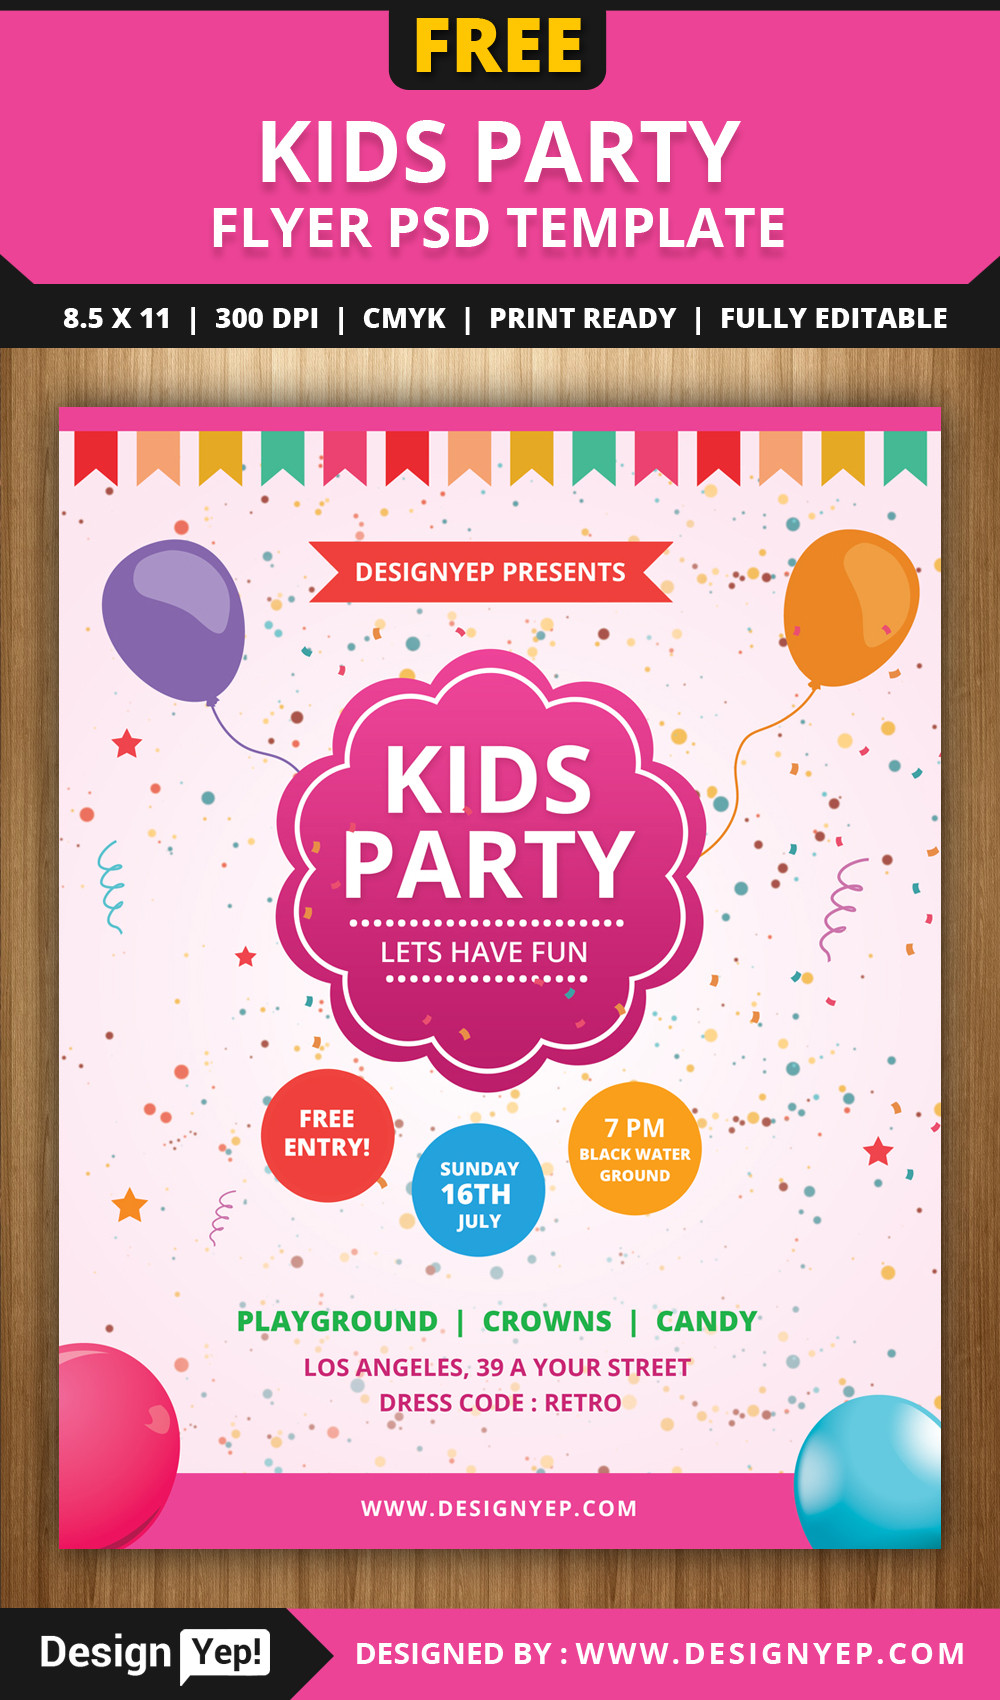 Kids Party Flyer
 Free Kids Party Flyer PSD Template on Behance